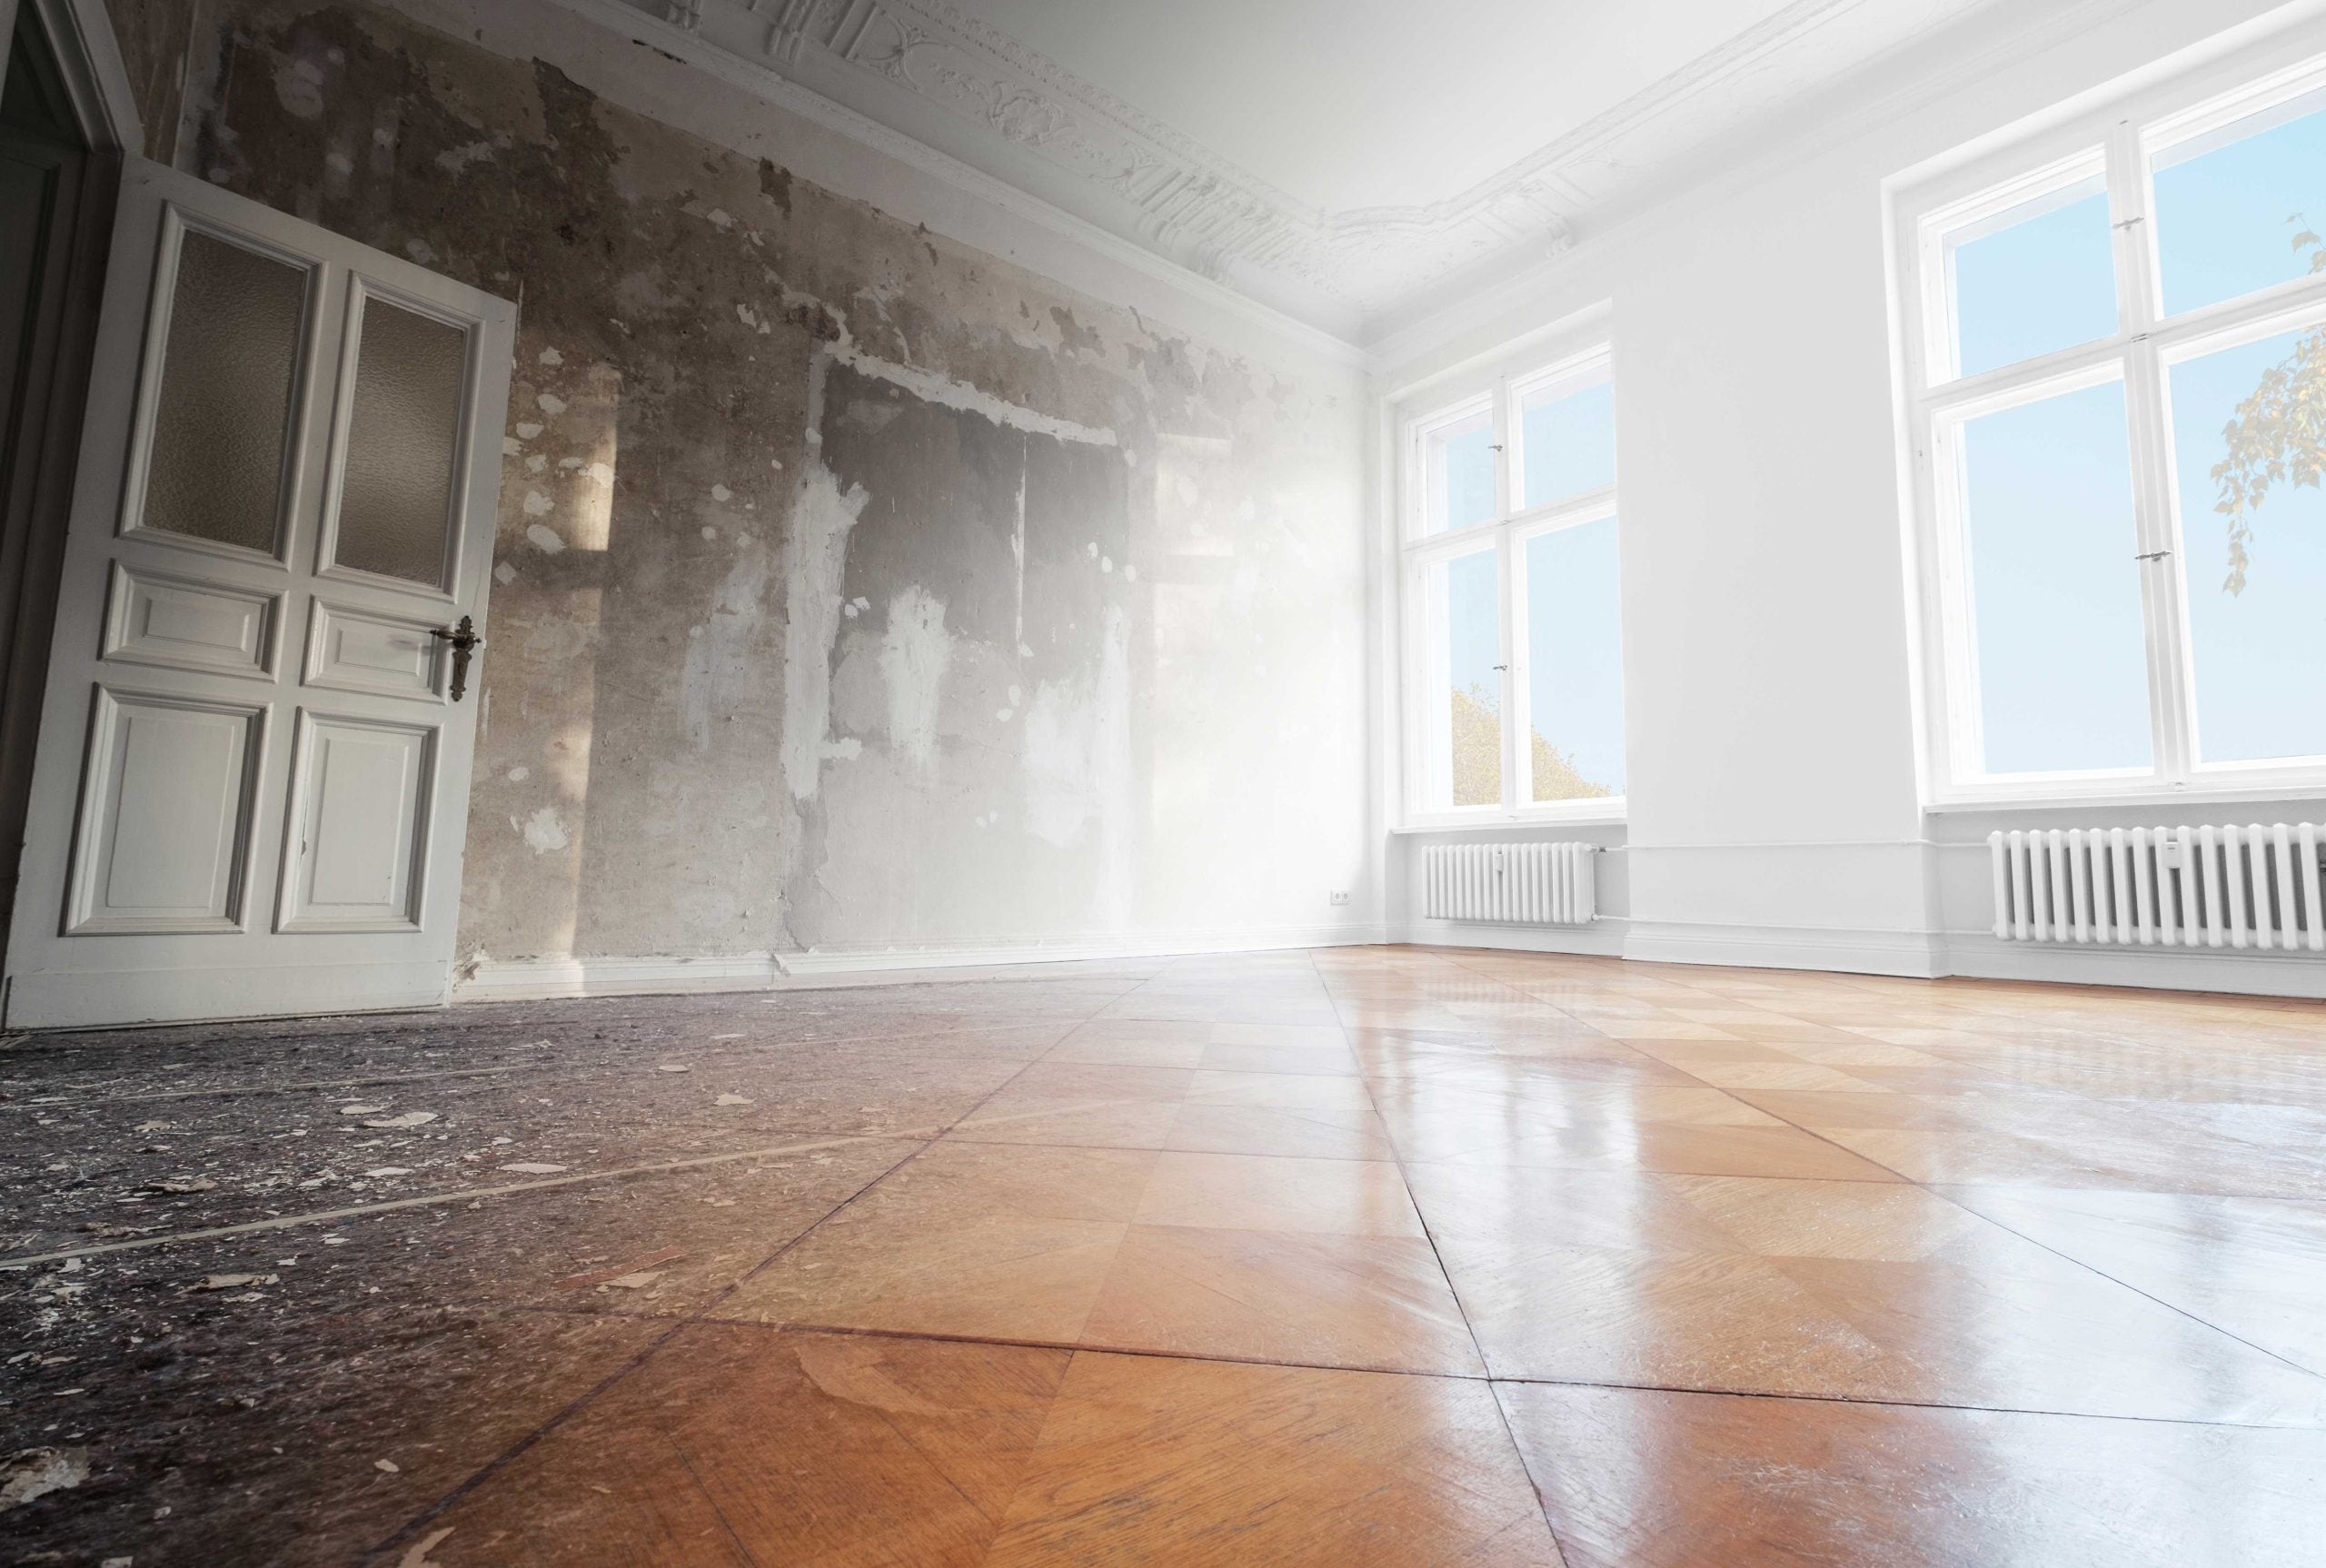 Smoke damage affects the wall and floor of a room in a {city} home.